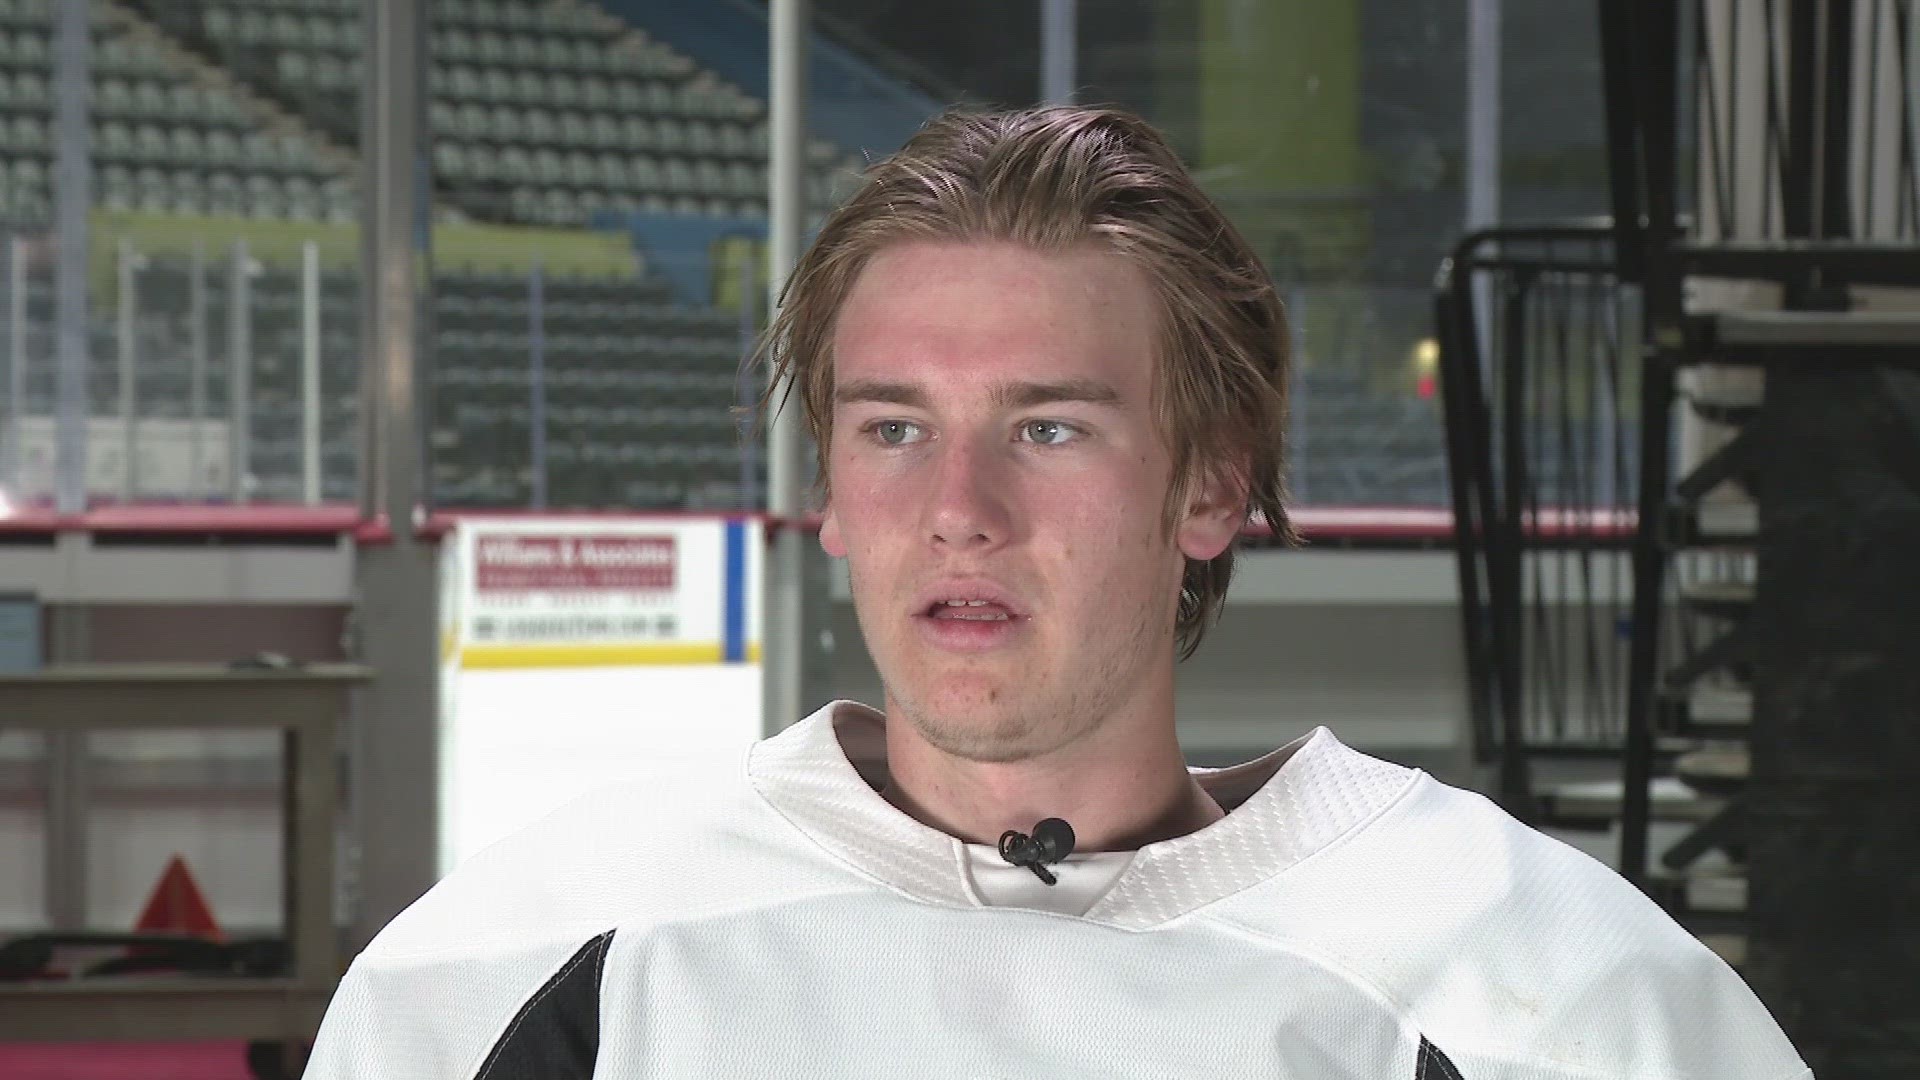 Josh Doan talks about ASU hockey, going pro, and playing for the Tucson Roadrunners